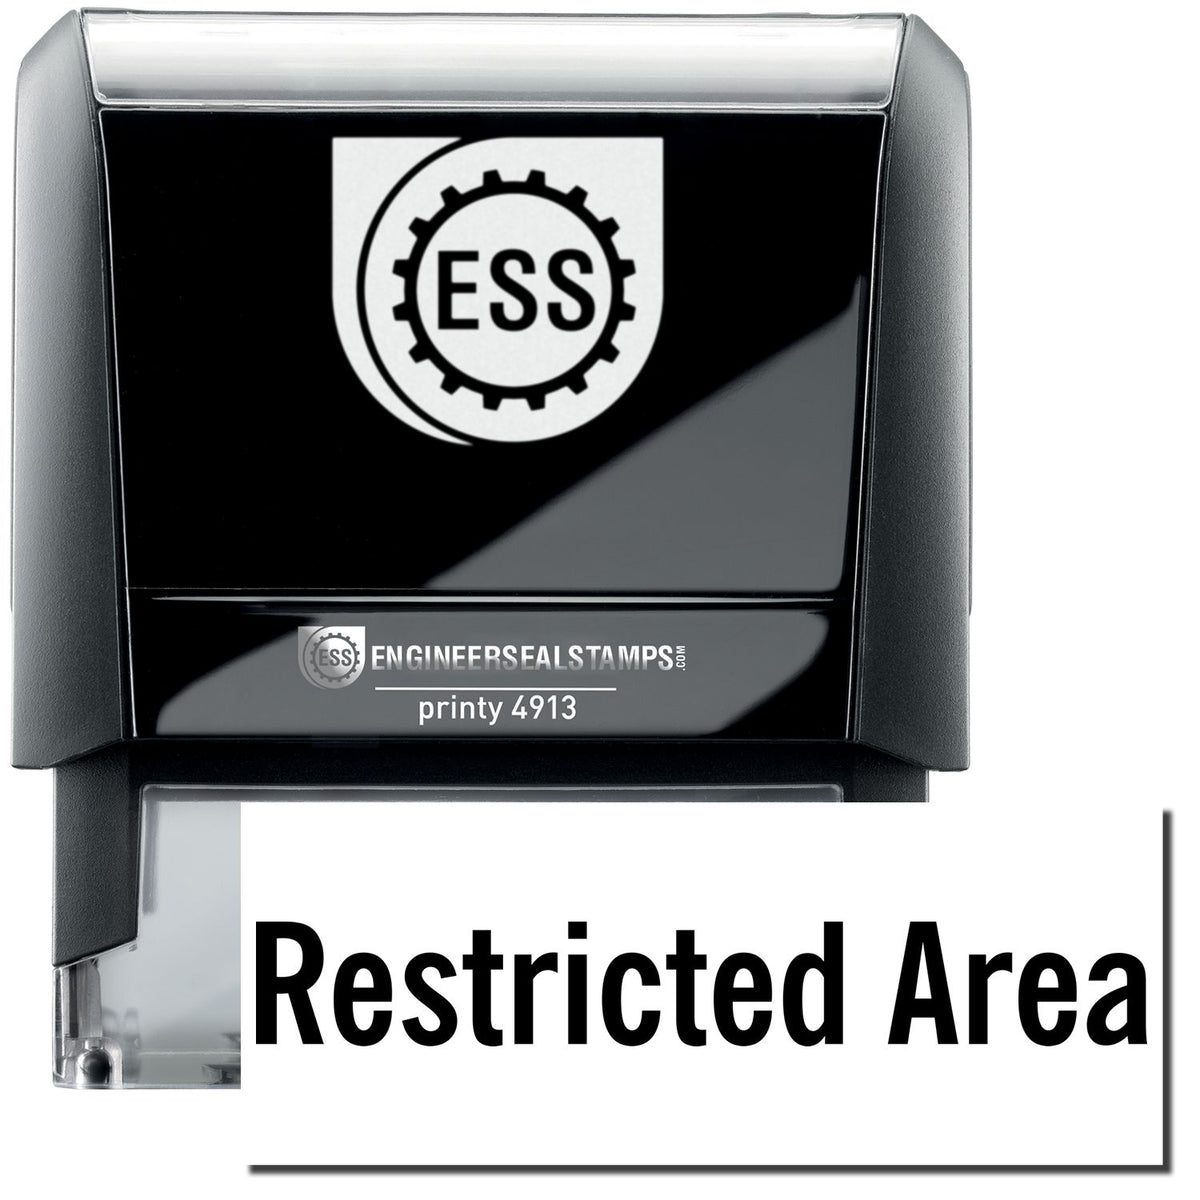 A self-inking stamp with a stamped image showing how the text &quot;Restricted Area&quot; in a large font is displayed by it after stamping.